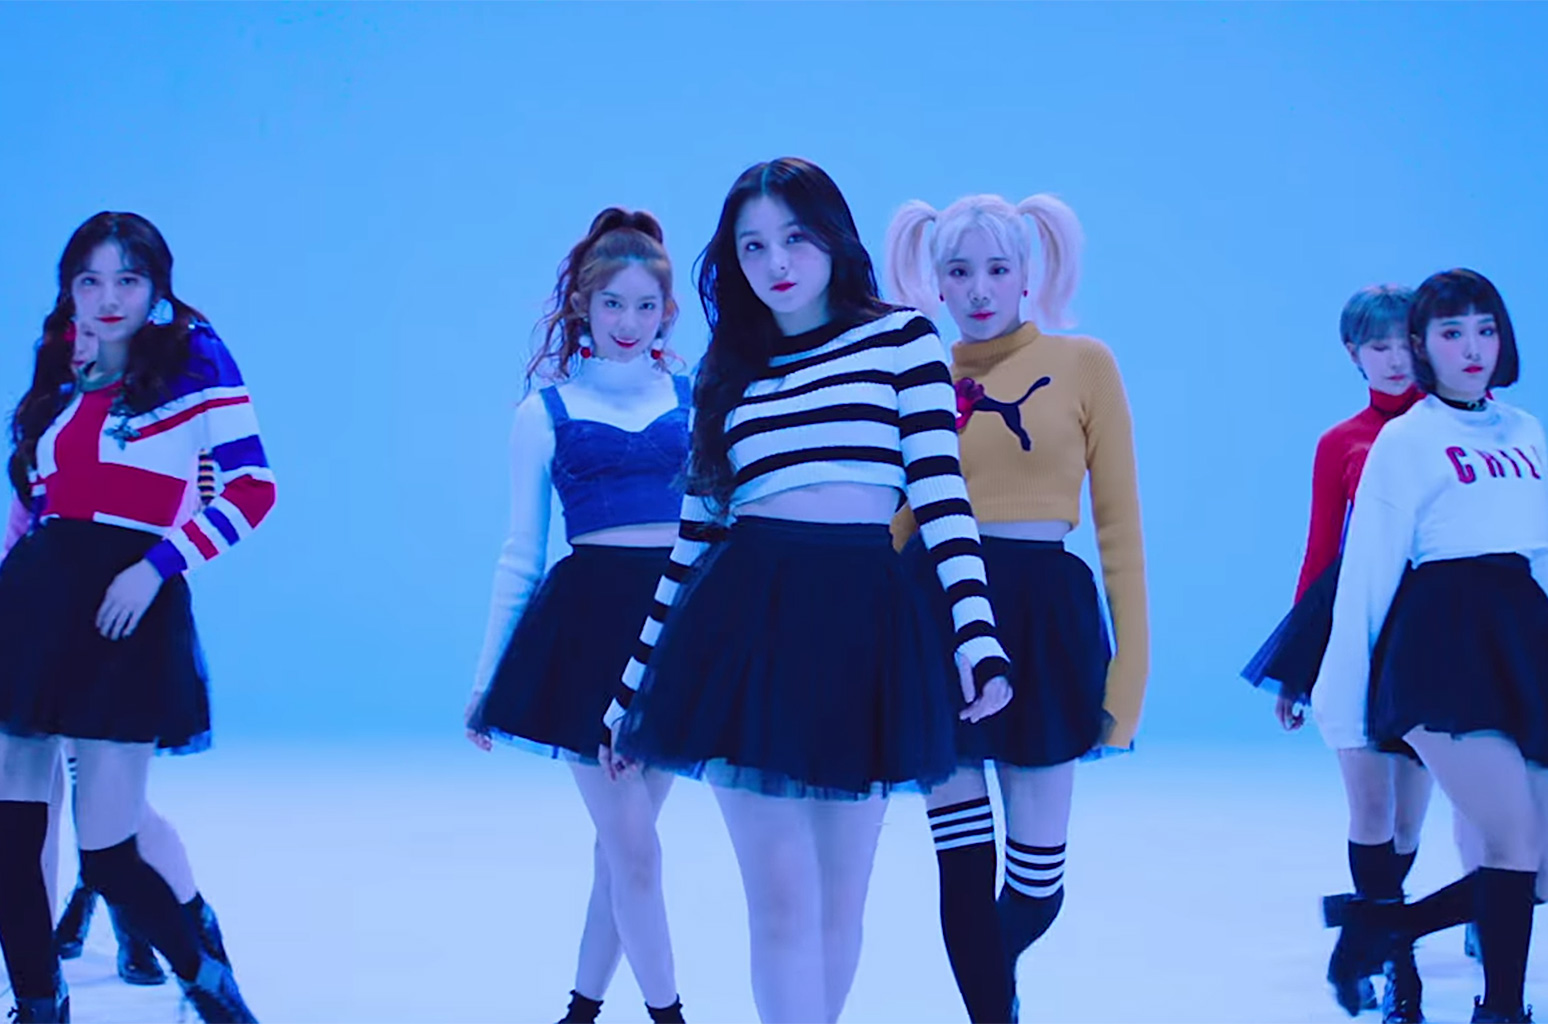 Momoland in their music video for their hit Bboom Bboom. (Screenshot: Bboom Bboom music video)